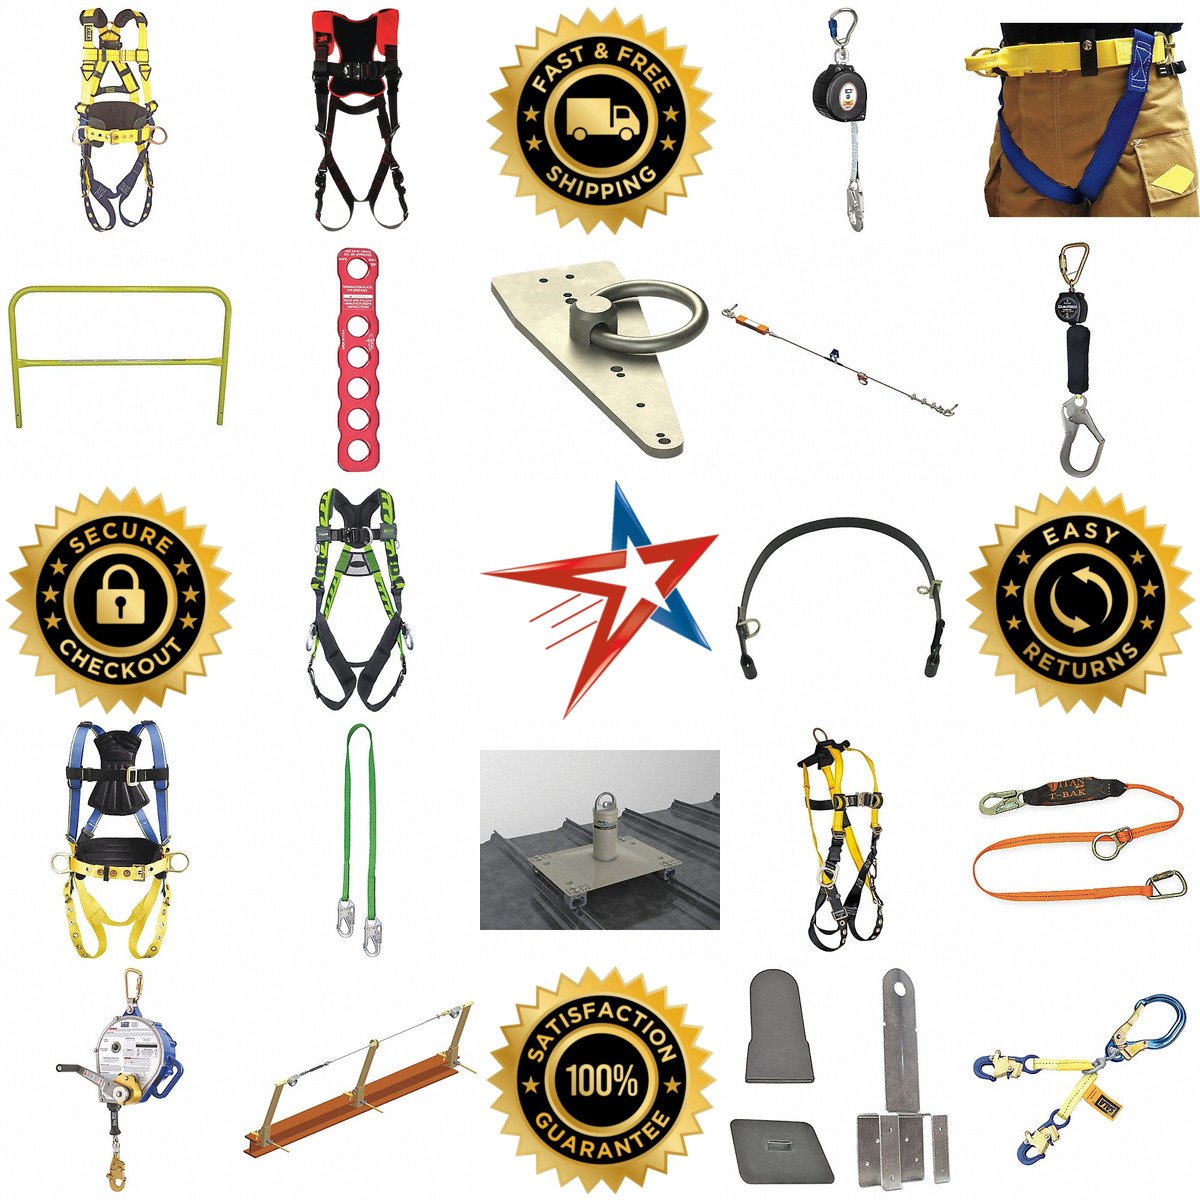 A selection of Fall Protection products on GoVets